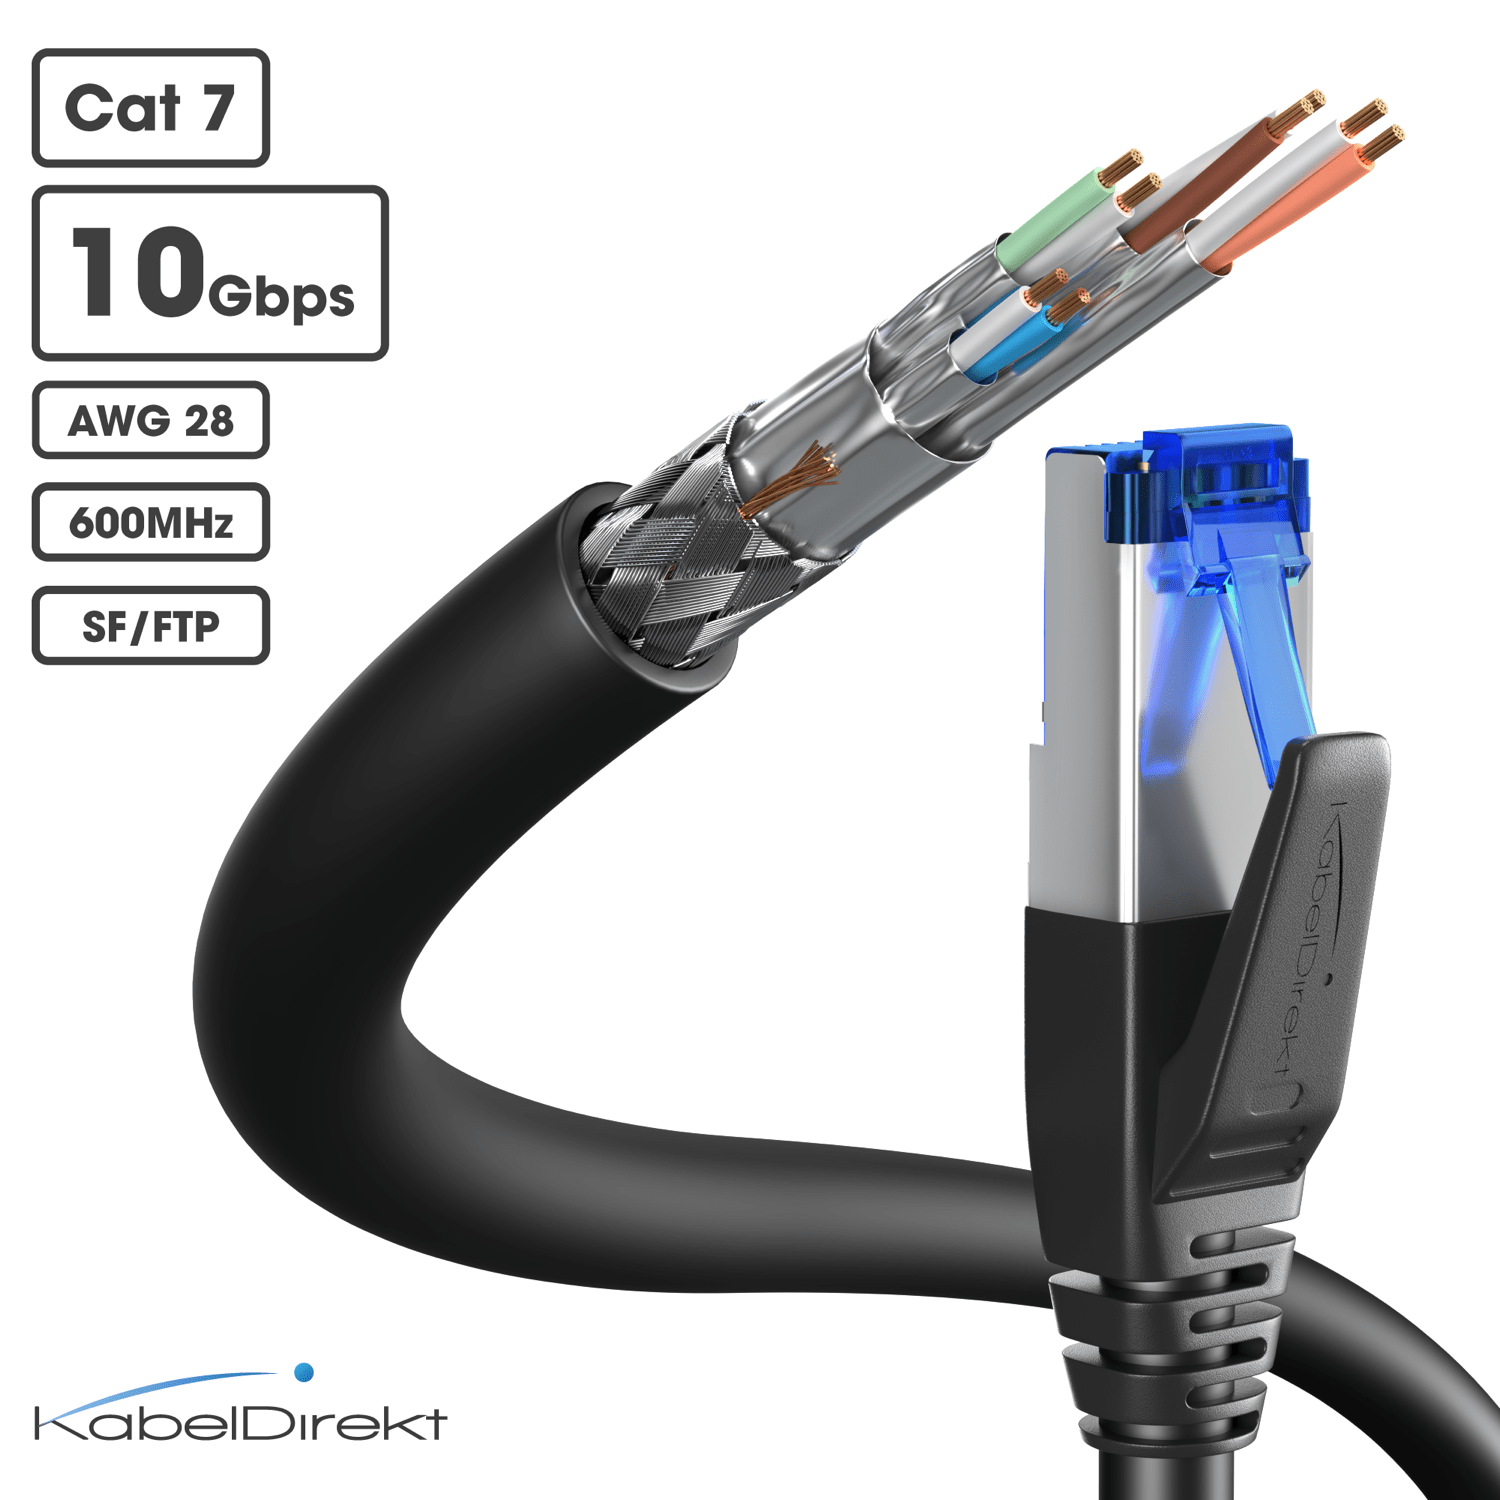 LDKCOK Cat 7 Internet Cable 10ft, Cat7 Outdoor Ethernet Cable 10 ft, 26AWG  Heavy-Duty Cat7 Networking Cord Patch Cable RJ45 Transmission Speed